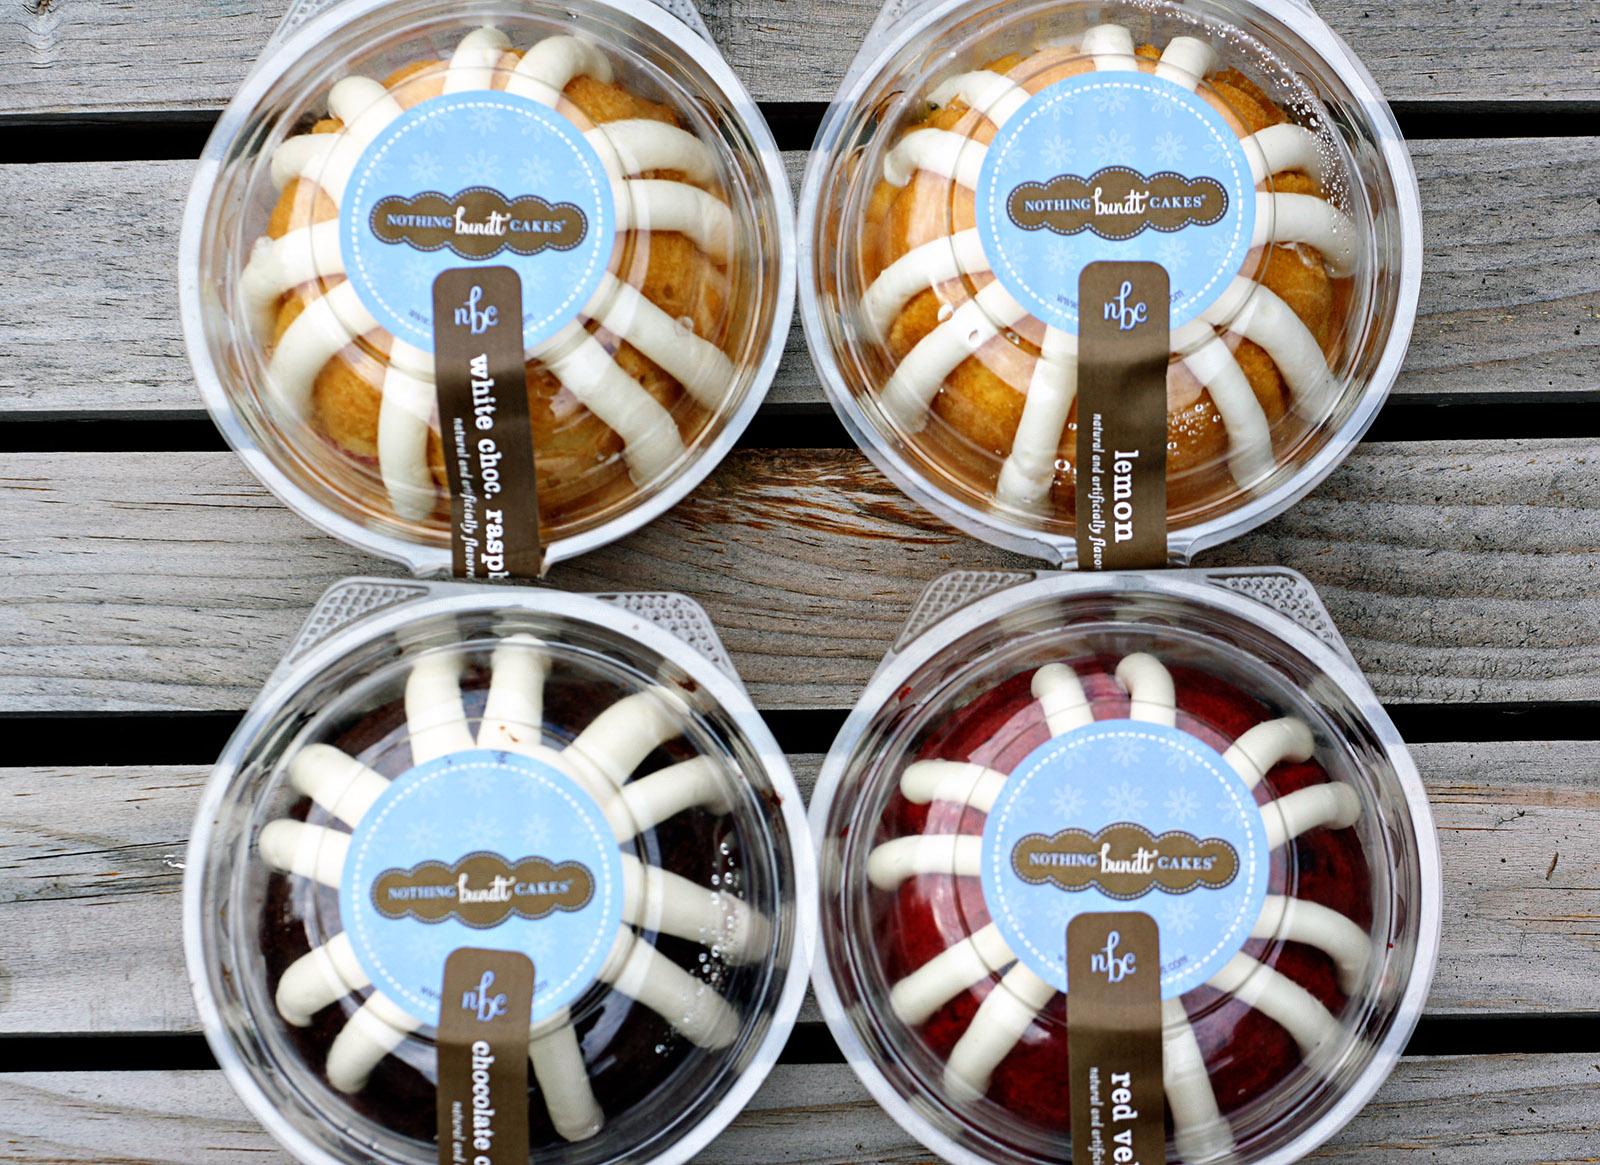 Nothing Bundt Cakes Buy One Get One Free Coupon